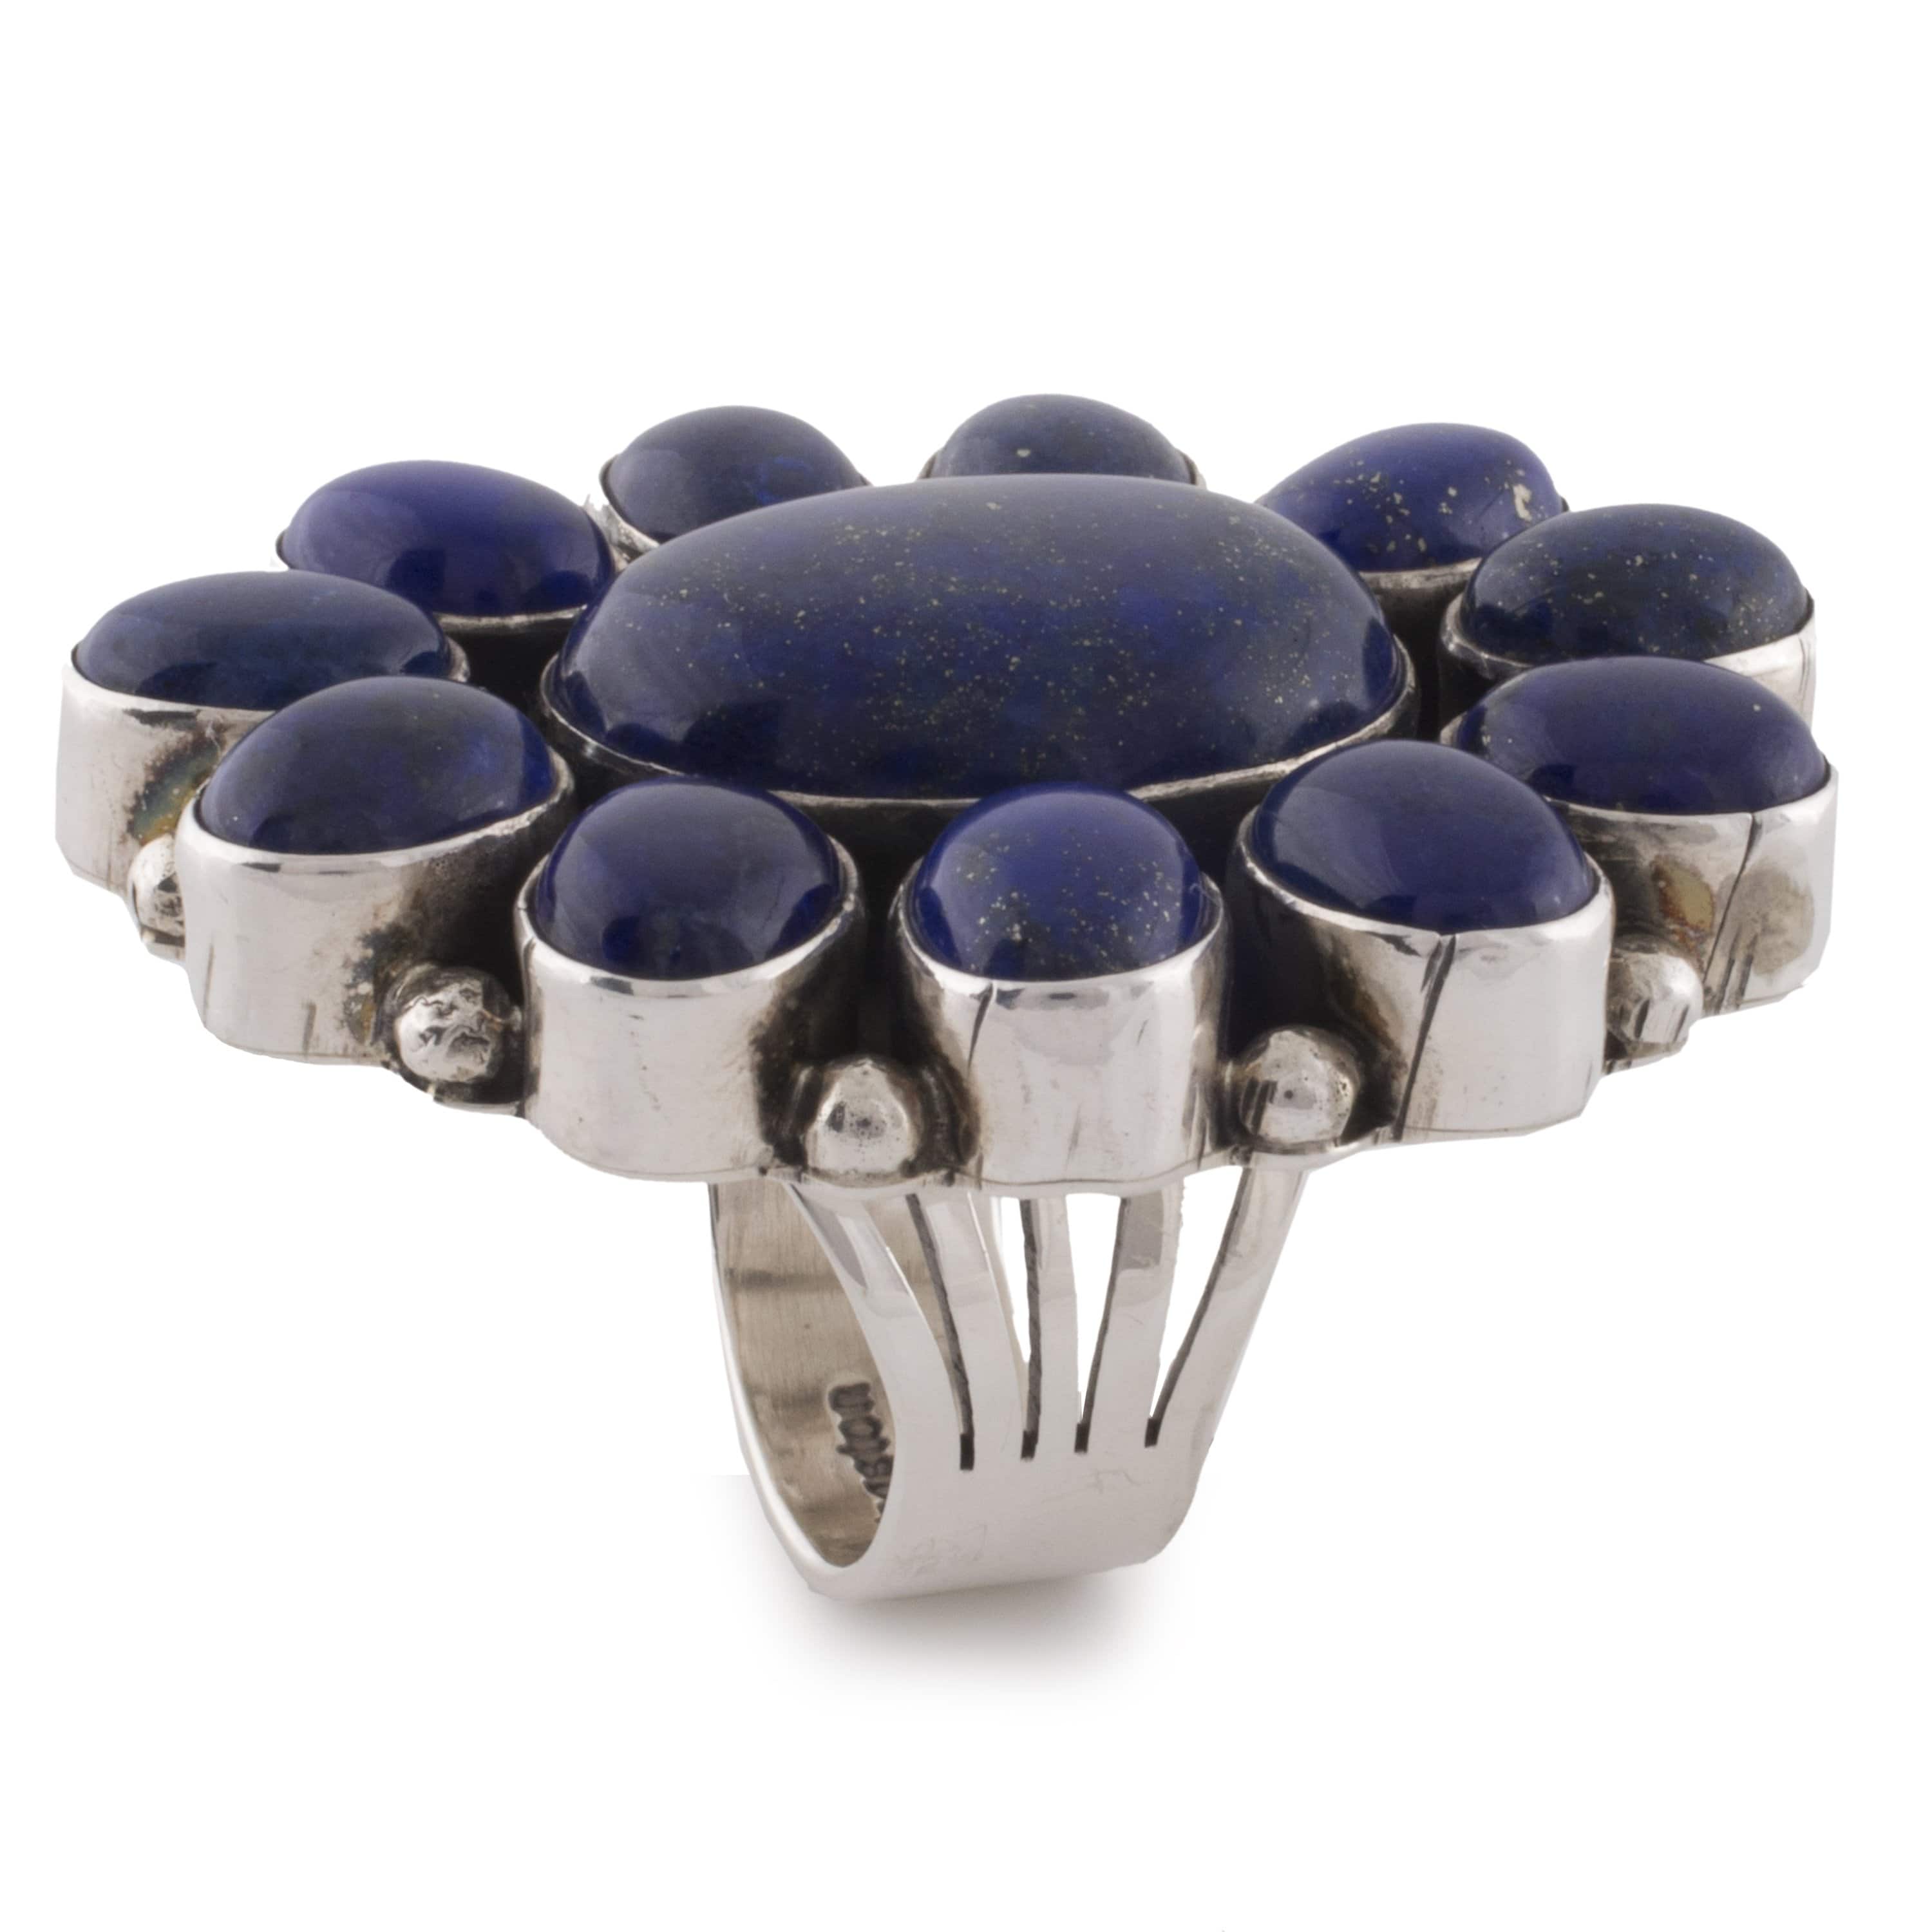 Kalifano Native American Jewelry 6 Paul Livingston Lapis Flower USA Native American Made 925 Sterling Silver Ring NAR1500.013.6